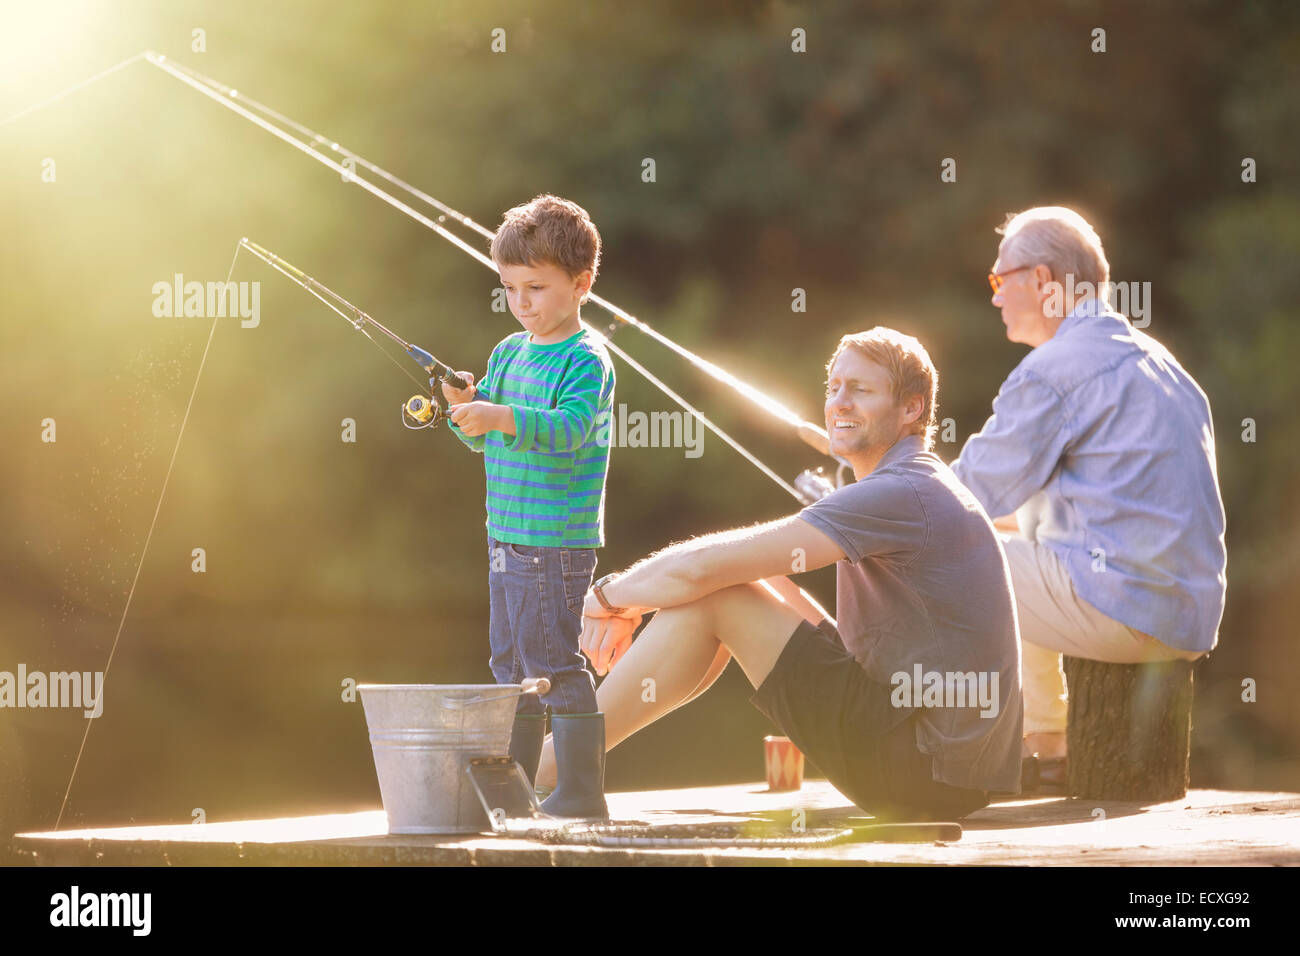 Boy, father and grandfather fishing on wooden dock Stock Photo